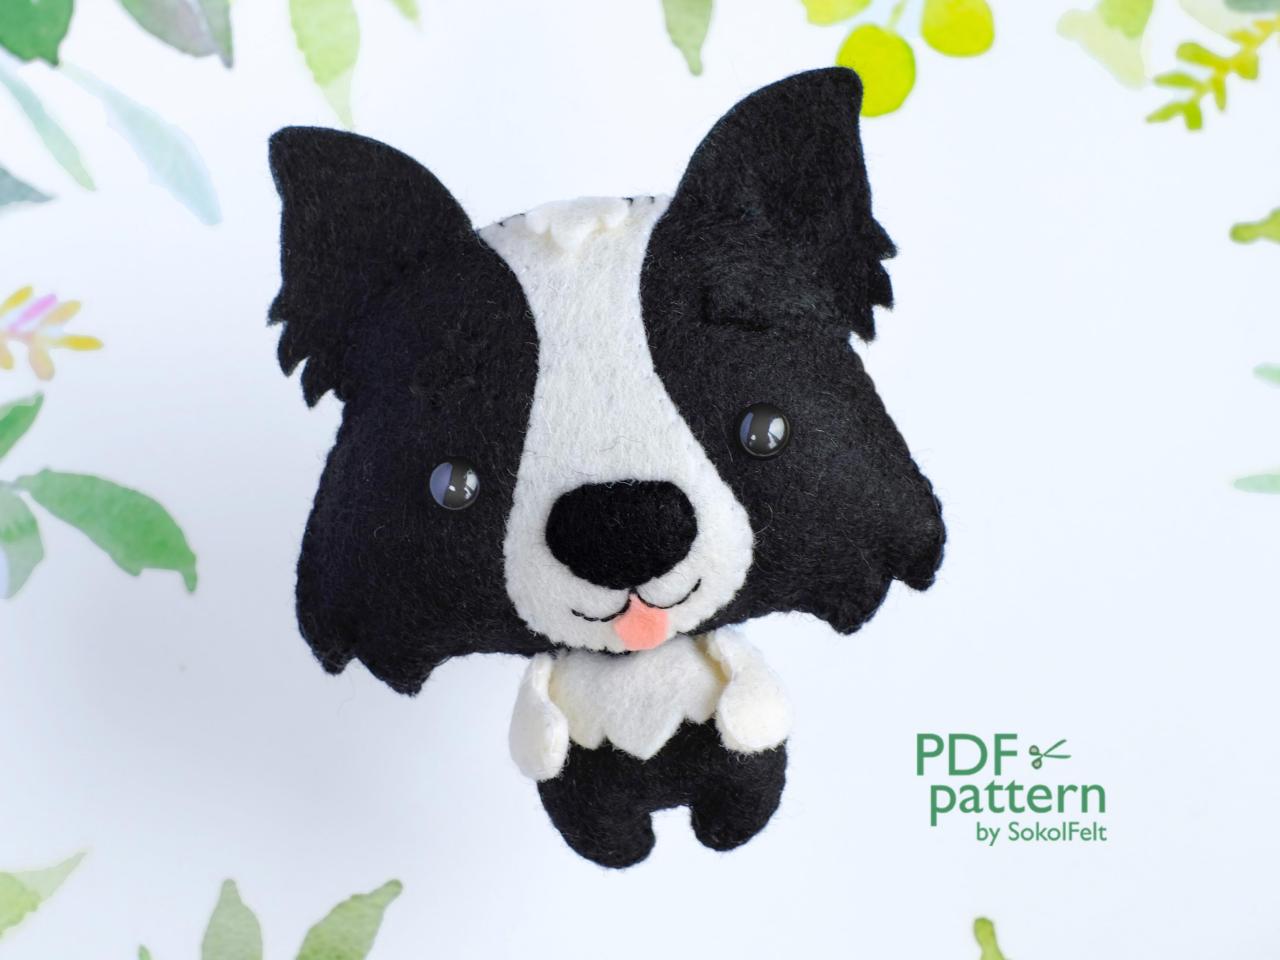 Border Collie Felt Toy Sewing Pdf And Svg Patterns, Cute Dog Sewing Tutorial, Dog Lover Gift, Baby Crib Mobile Toy